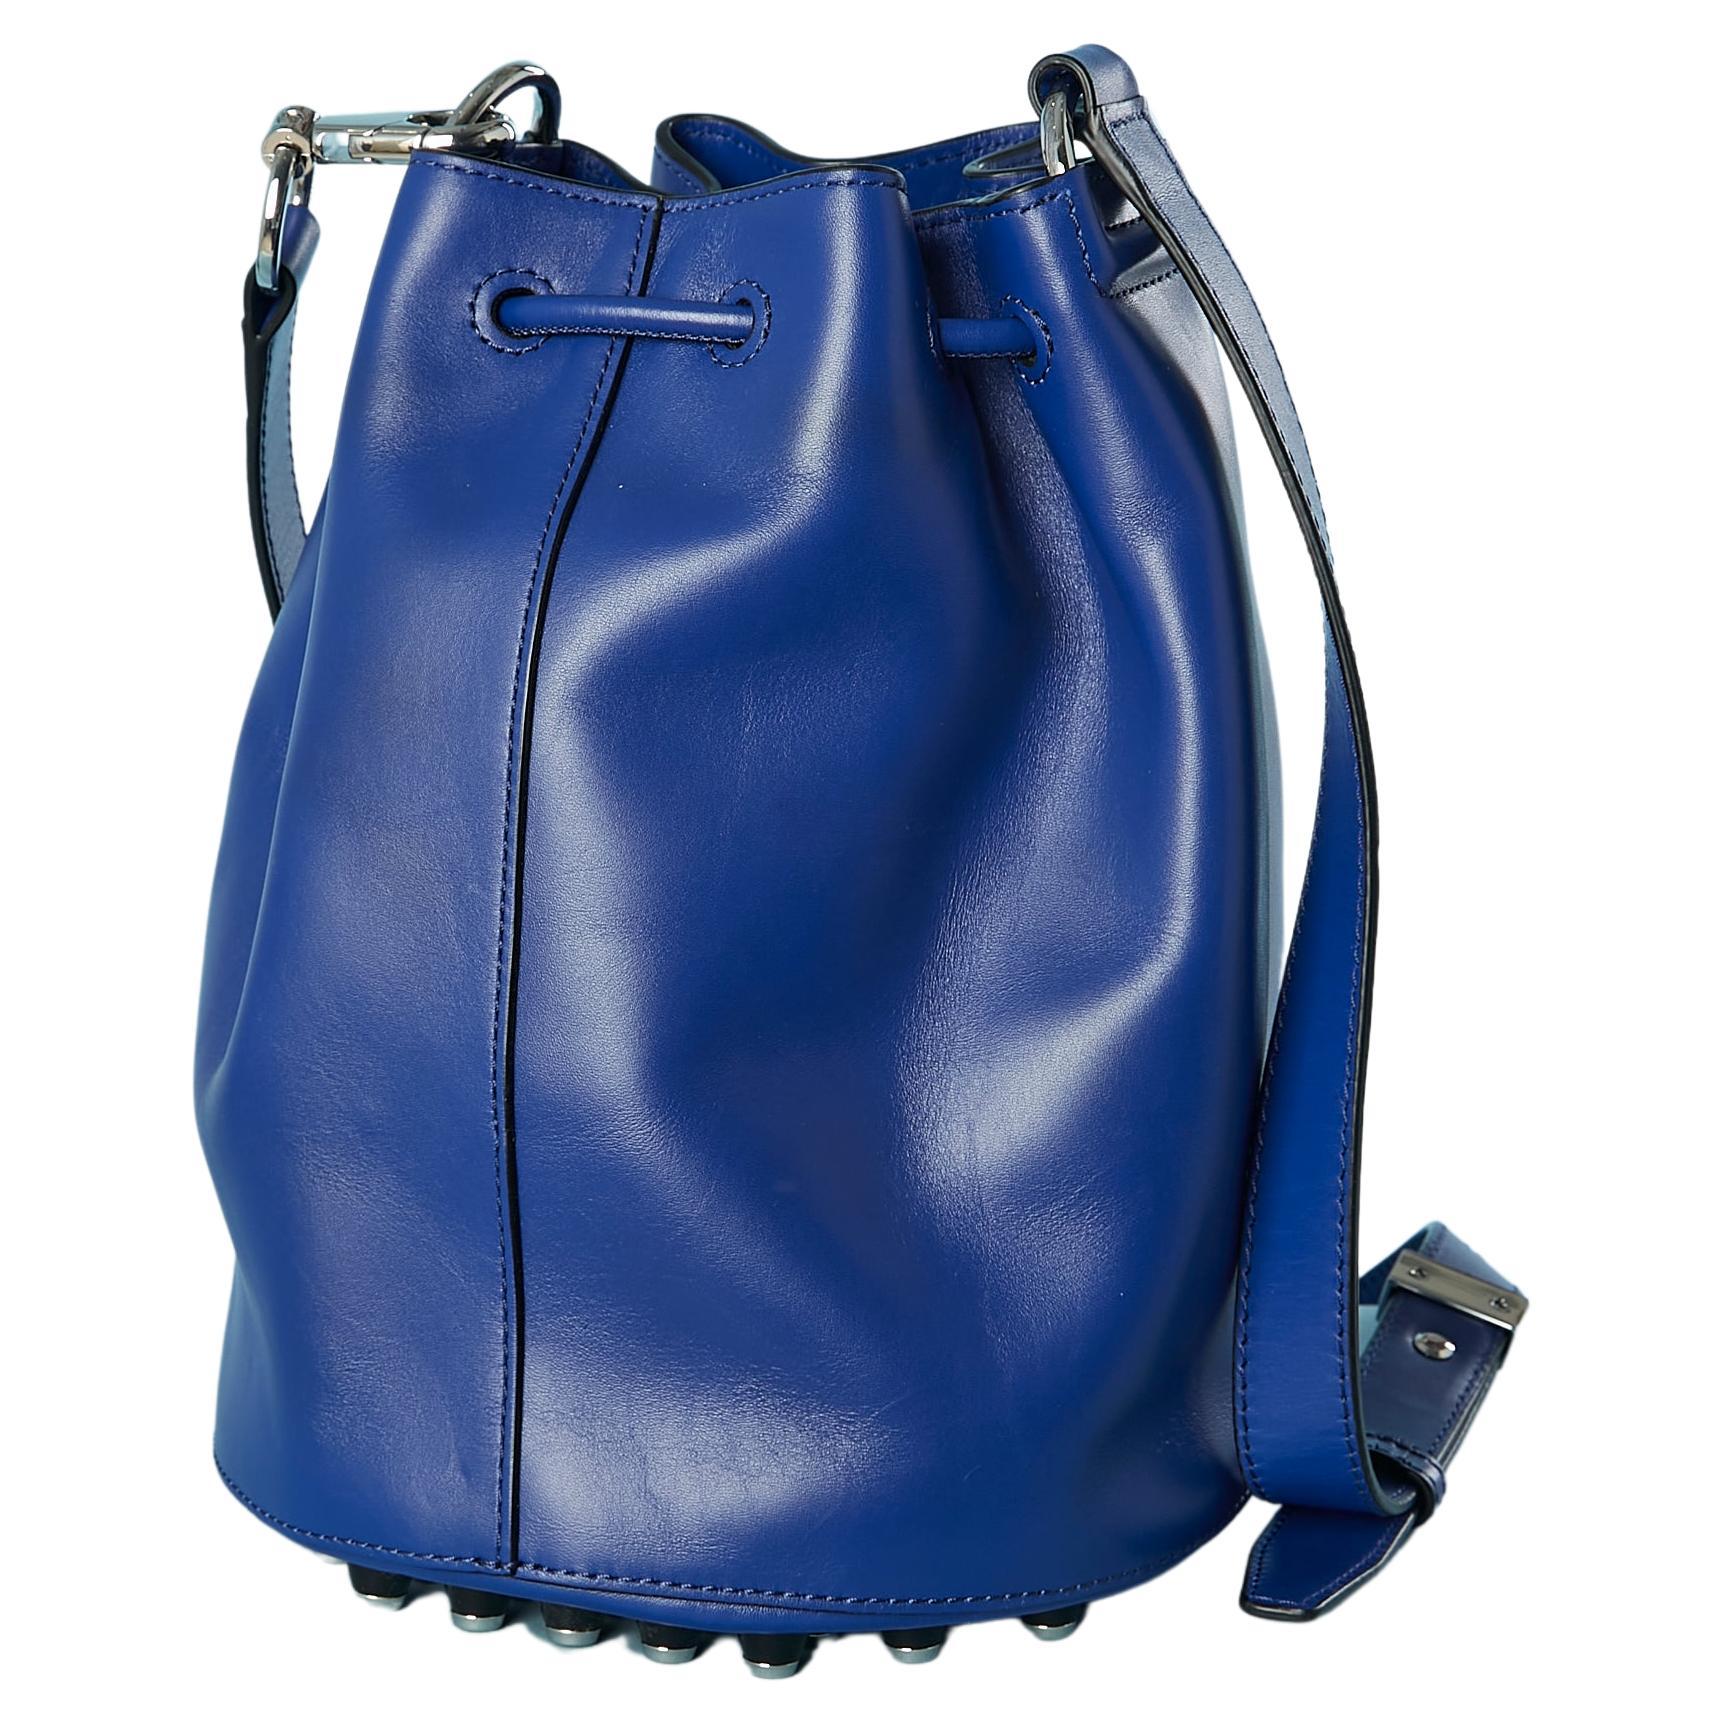 Blue leather bucket bag with silver hardware Alexander Wang NEW with tag